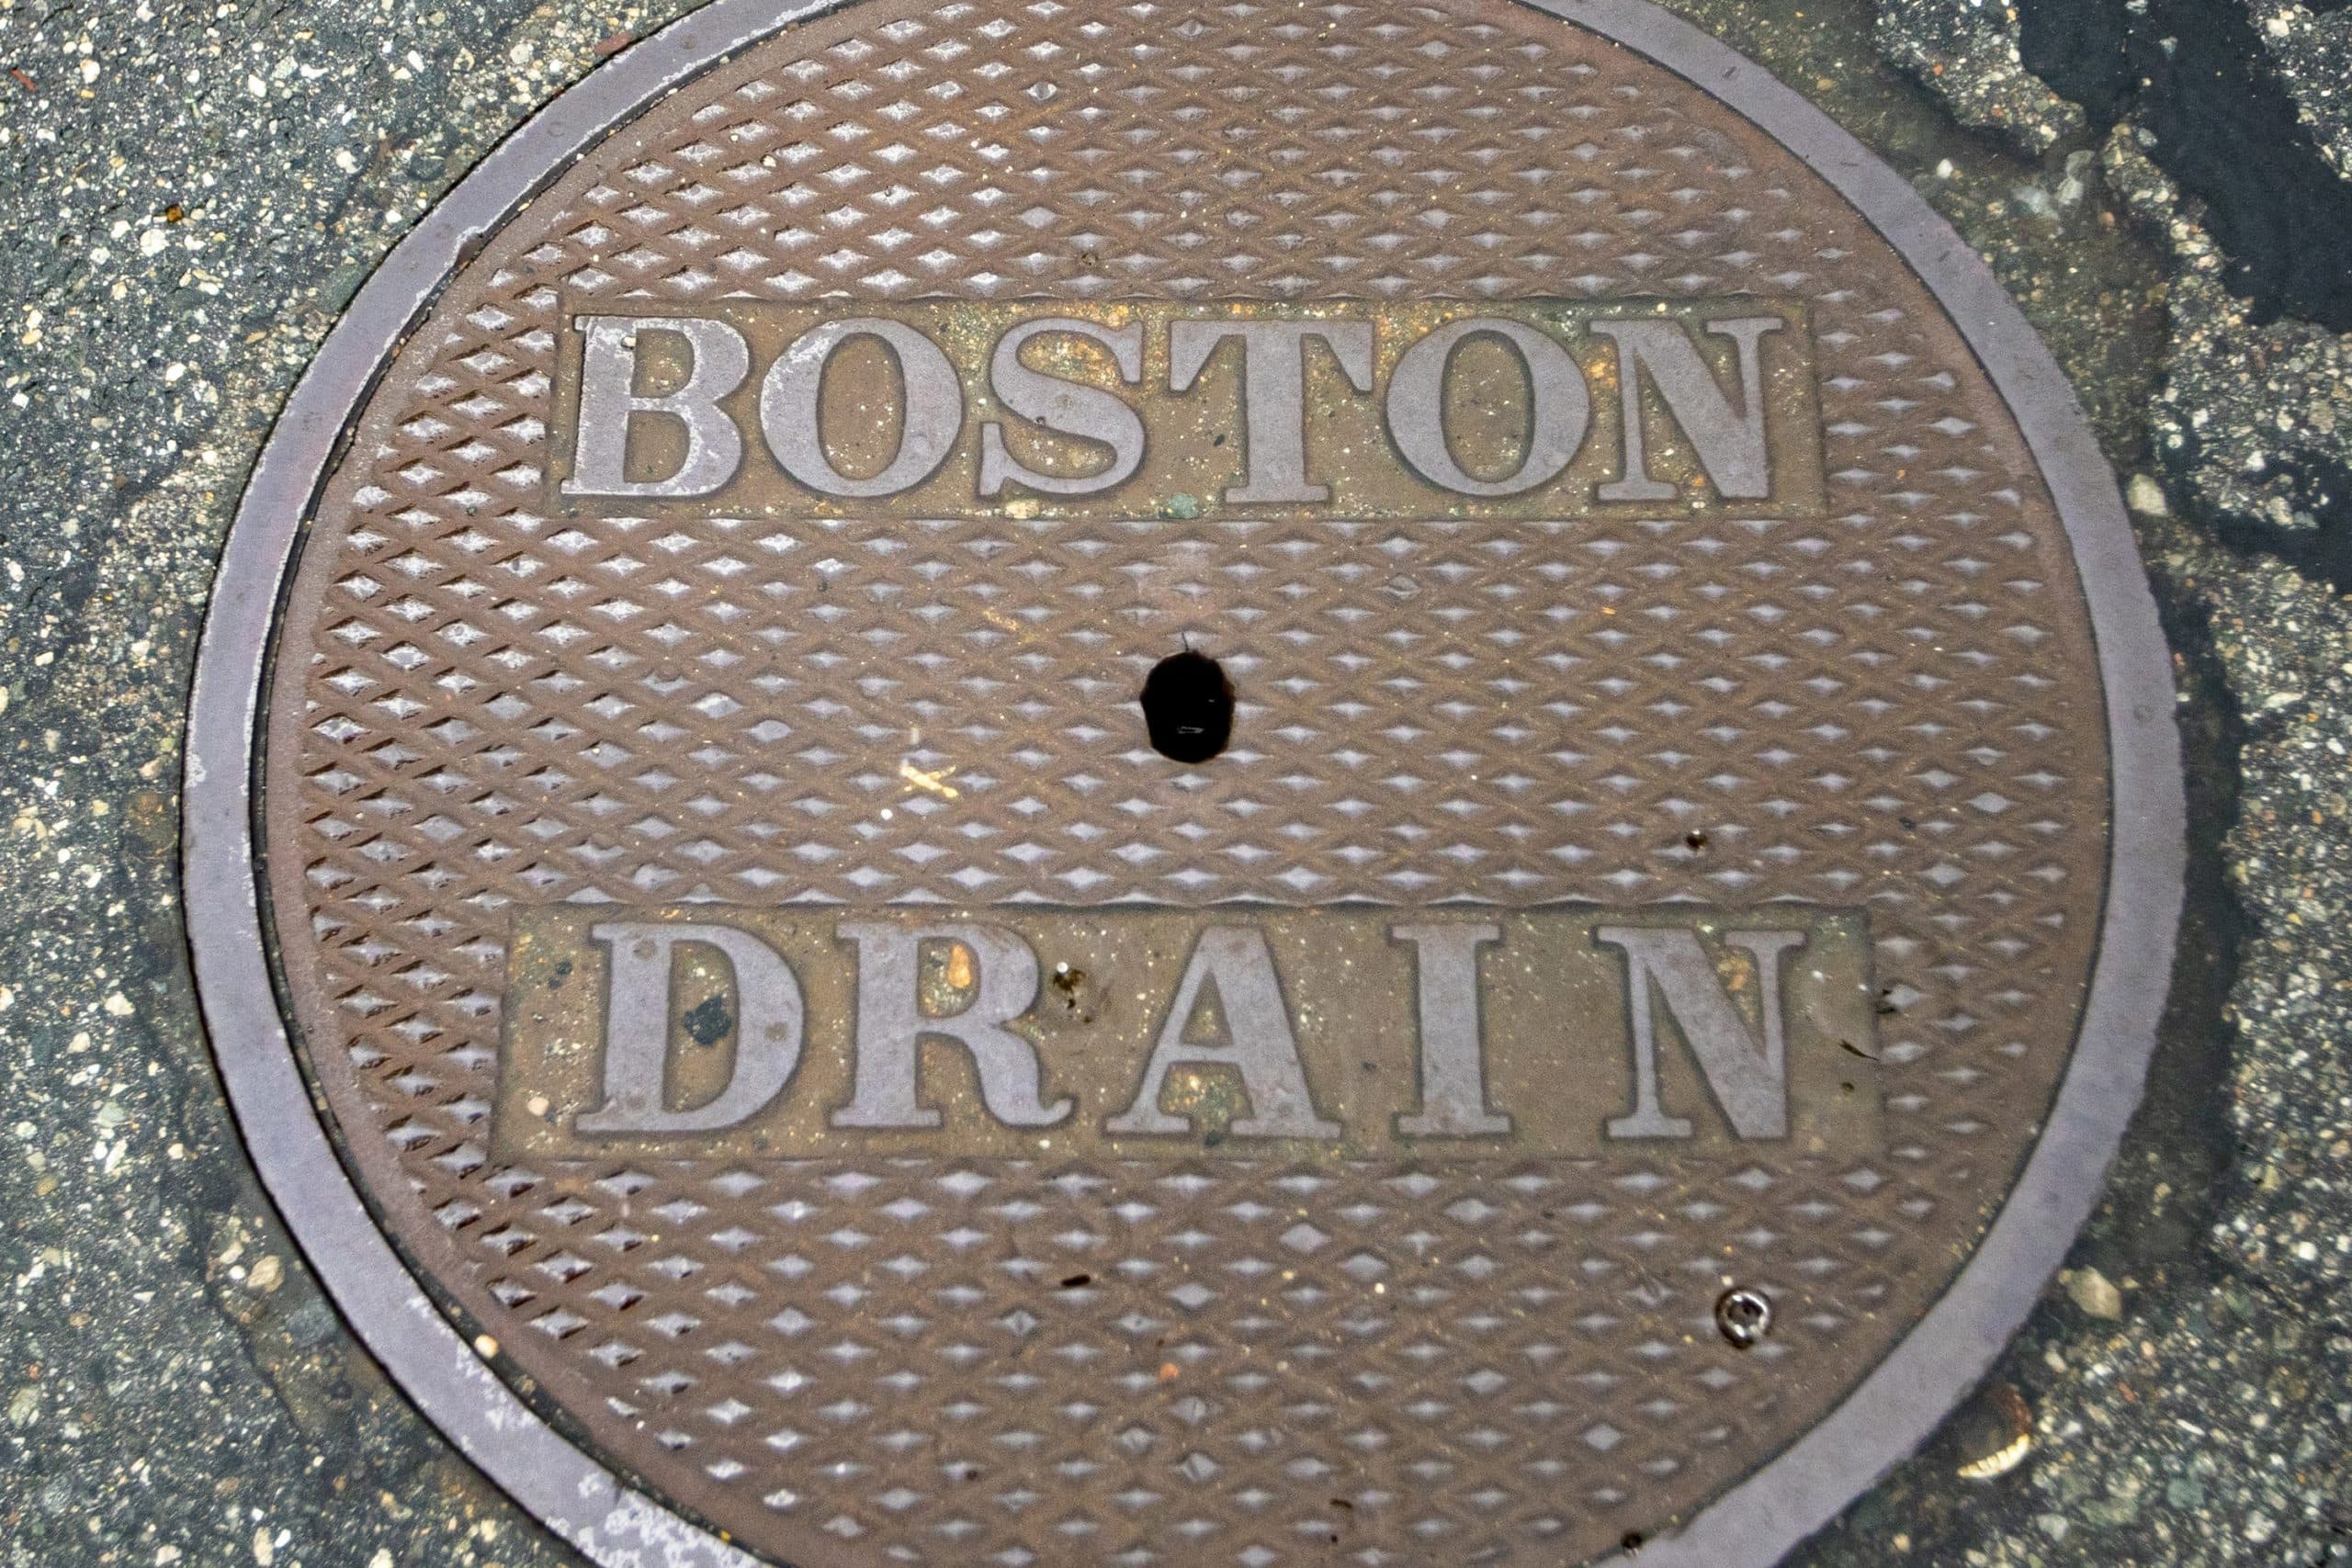 Rainwater collects on a manhole cover on Marginal Street in East Boston. (Jesse Costa/WBUR)